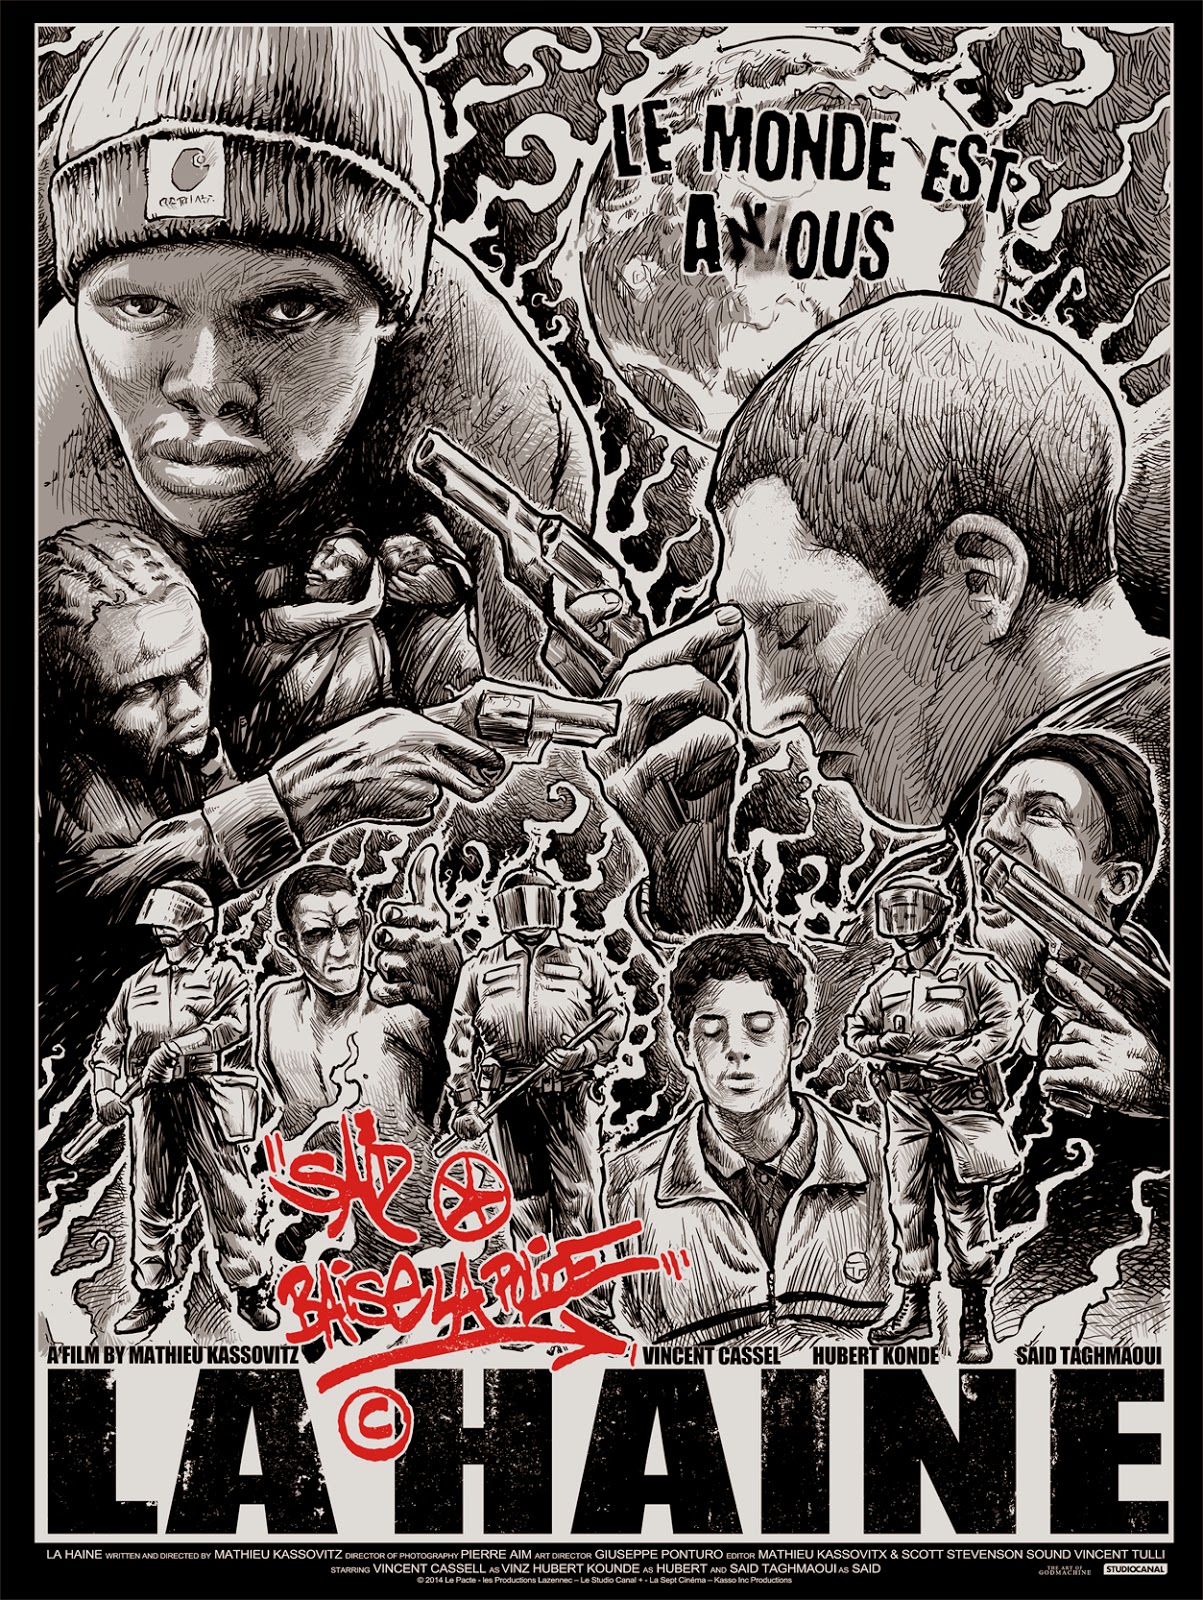 Anonymous Employee Own La Haine” by Godmachine | 411posters